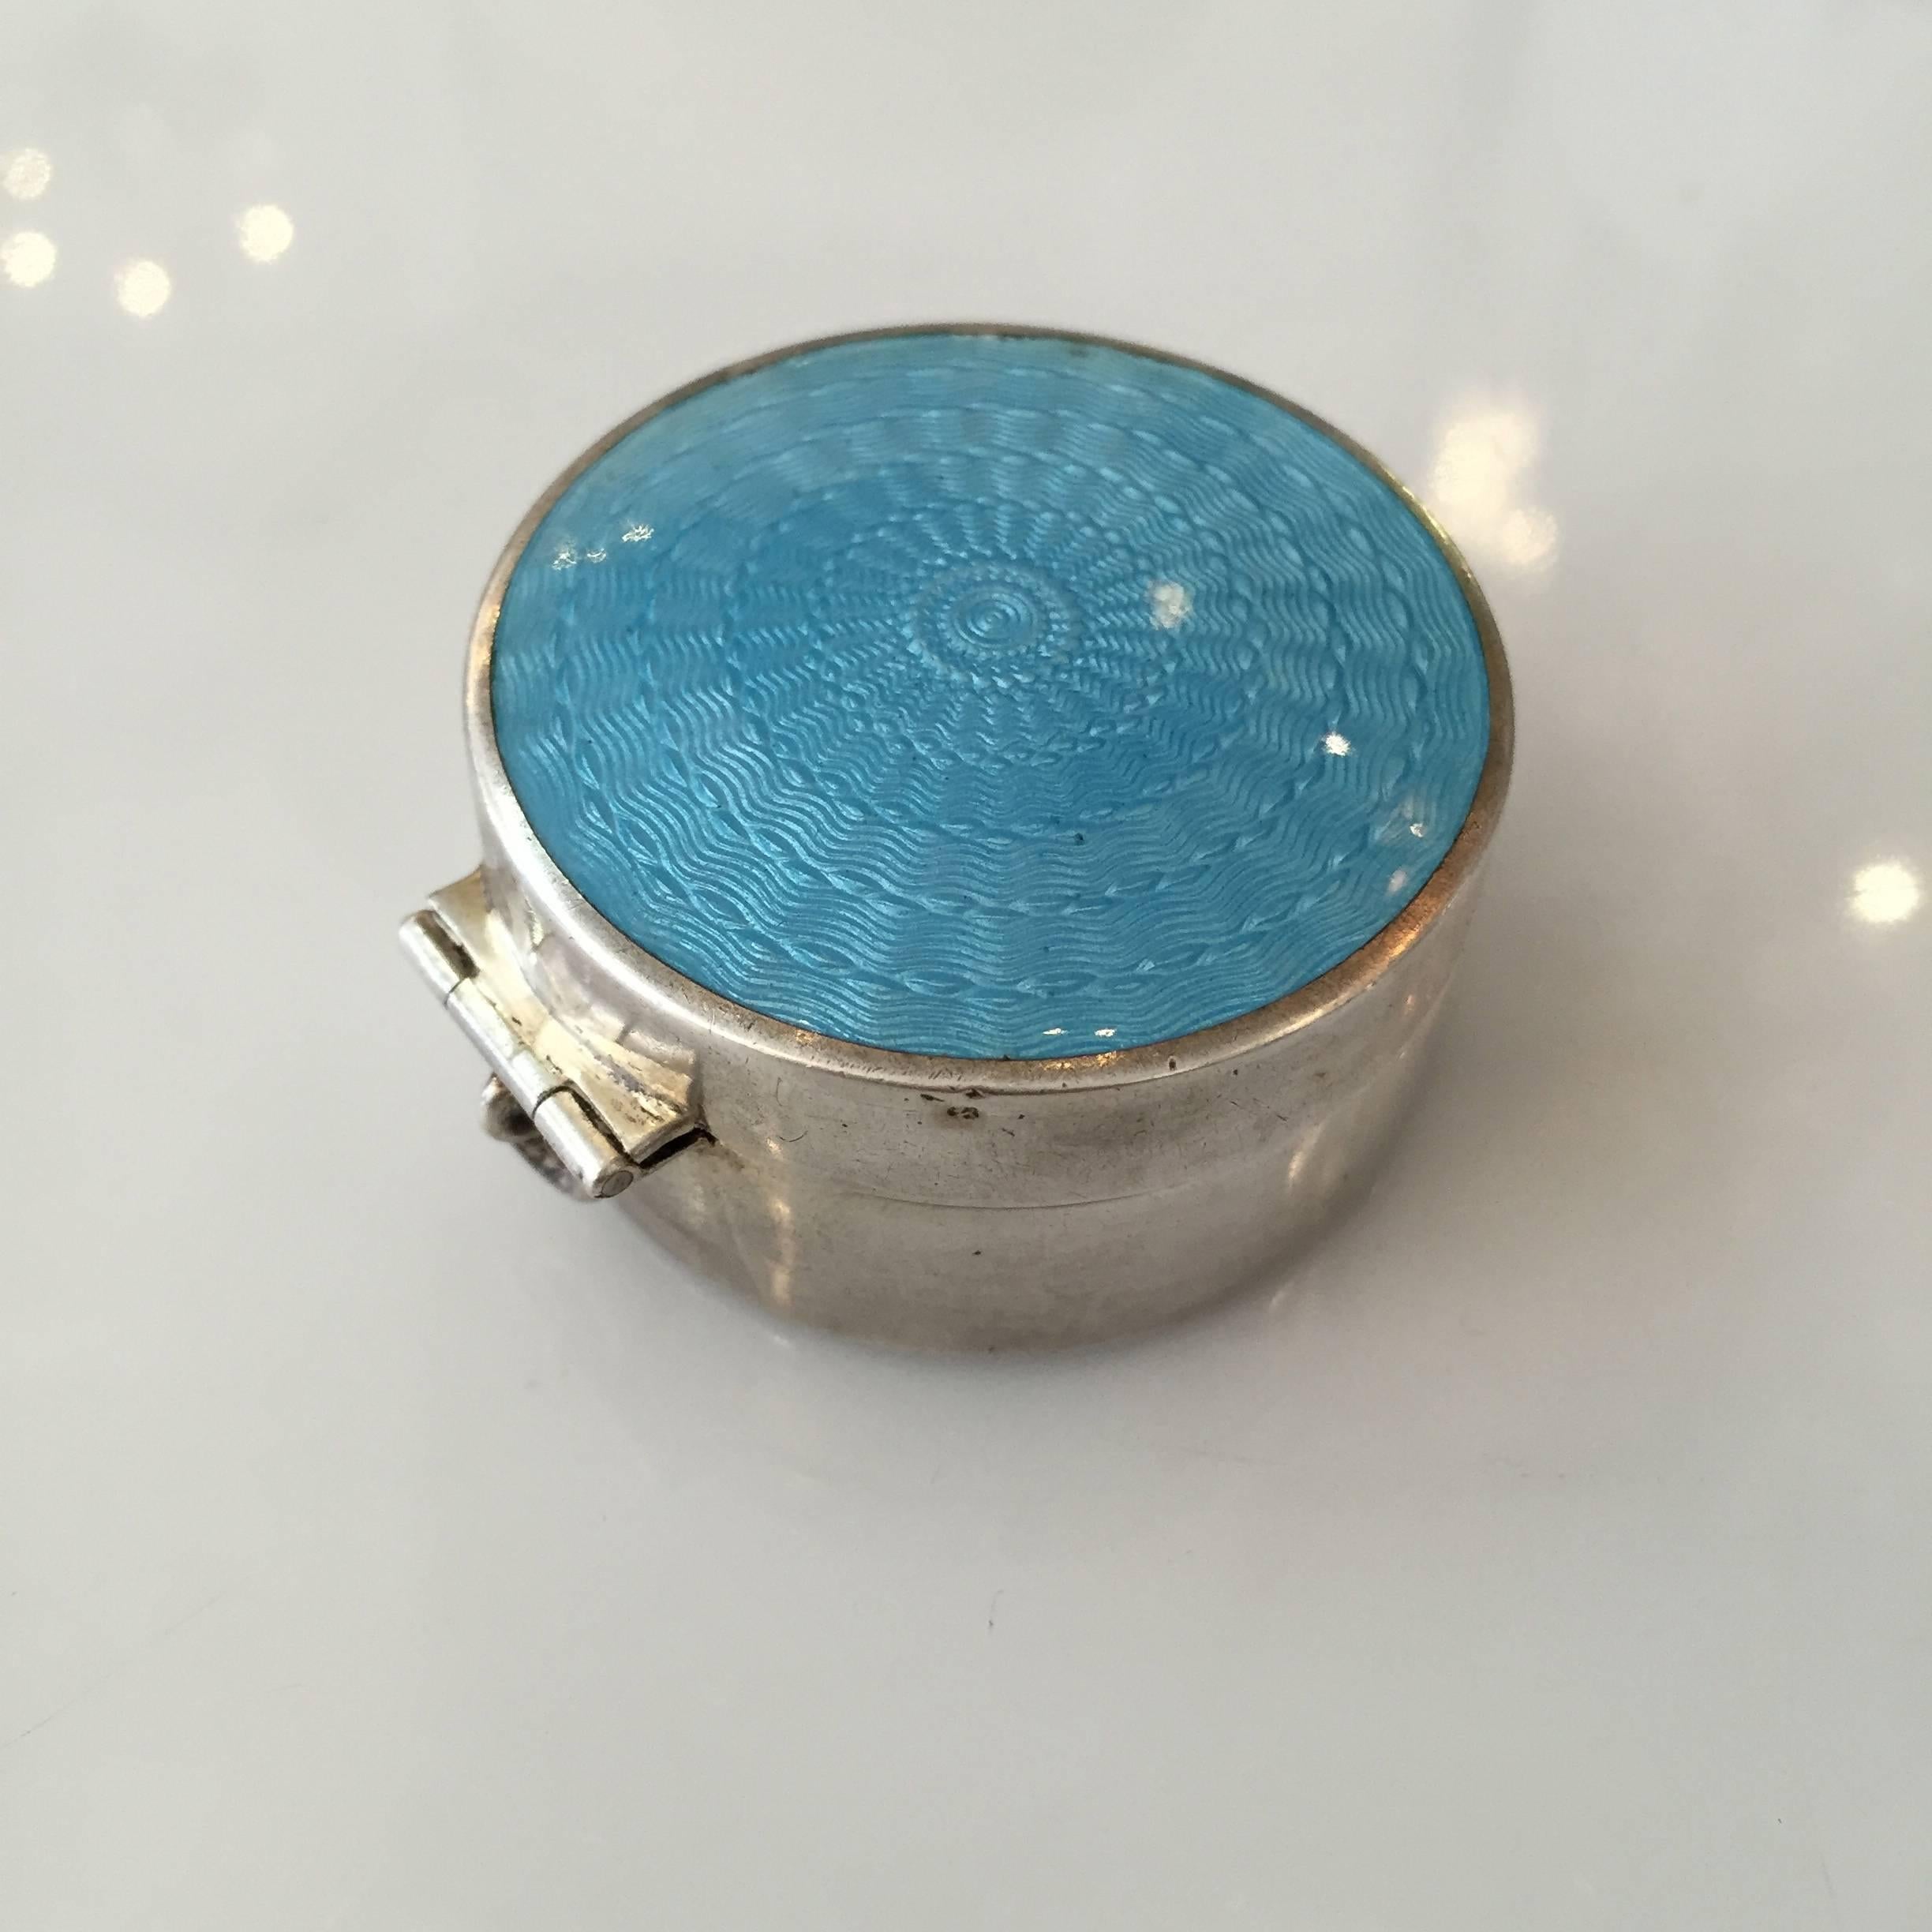 This item is 25% off in celebration of Harveys on Beverly's 50th Anniversary! 

Art Deco sterling silver enamelware in vibrant turquoise color. Compact pillbox with a mirror and is made to wear on a long chain as a necklace.


Hallmark reads, 